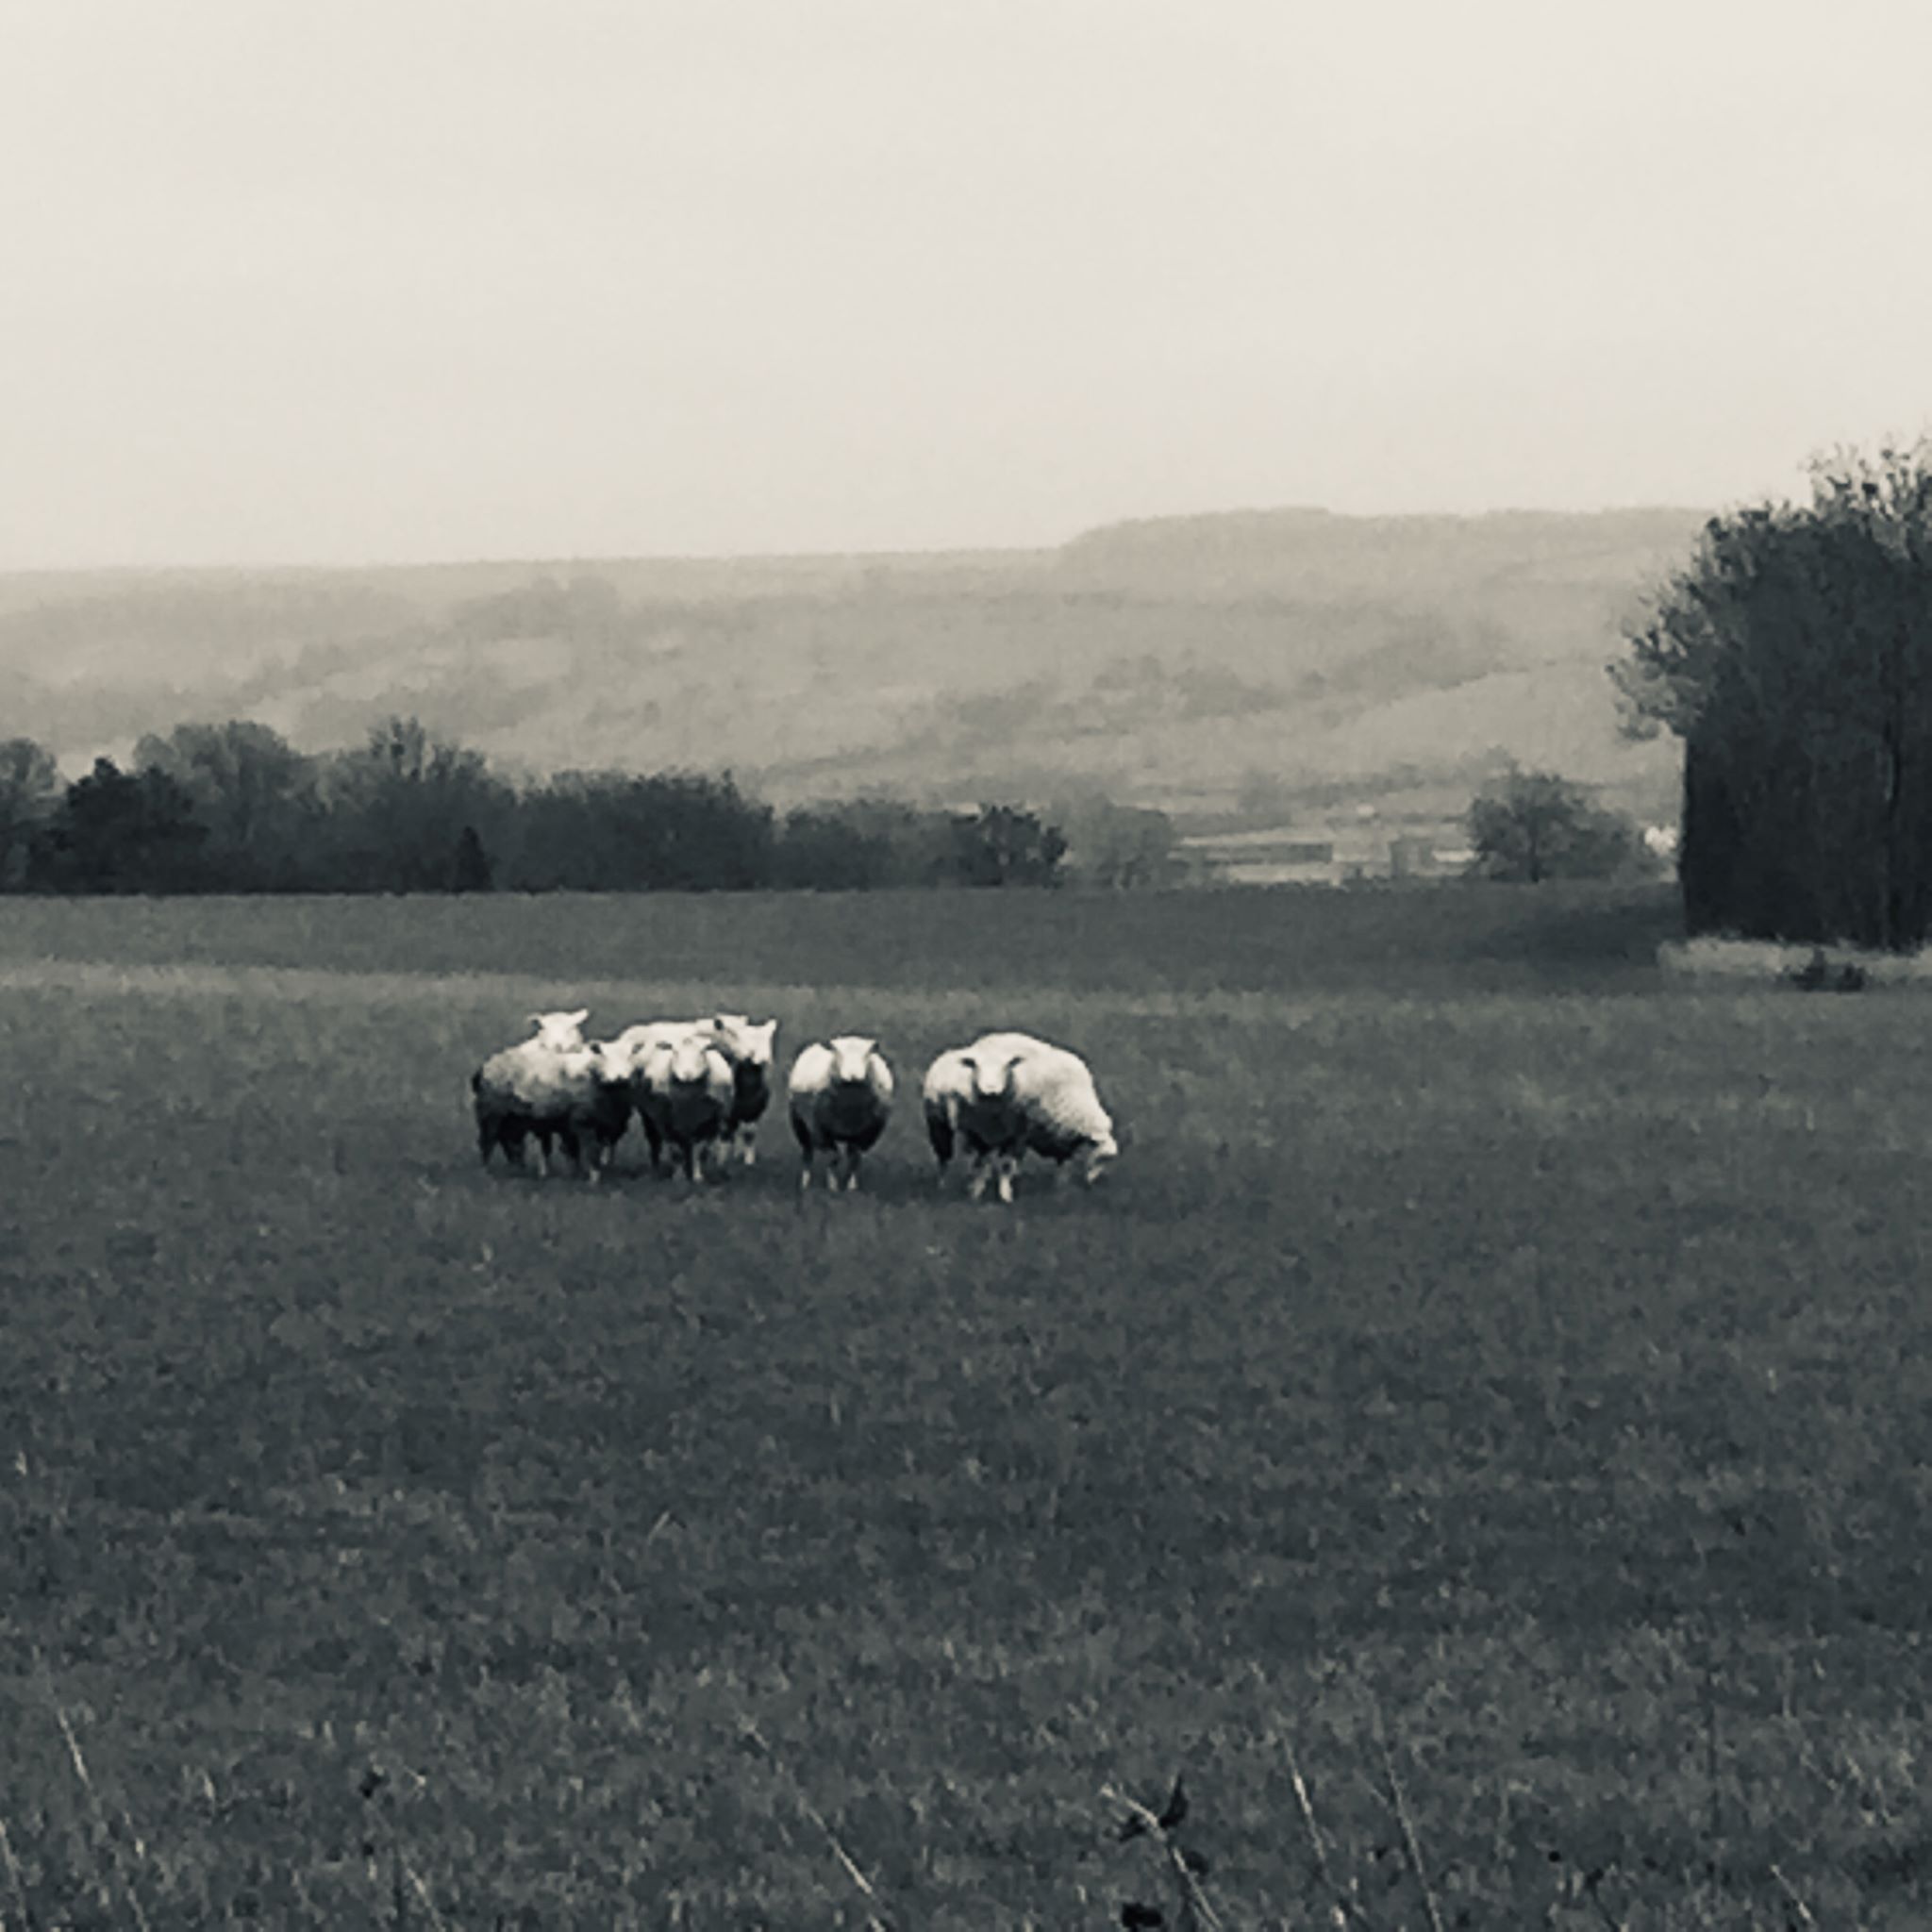 Image of sheep in field